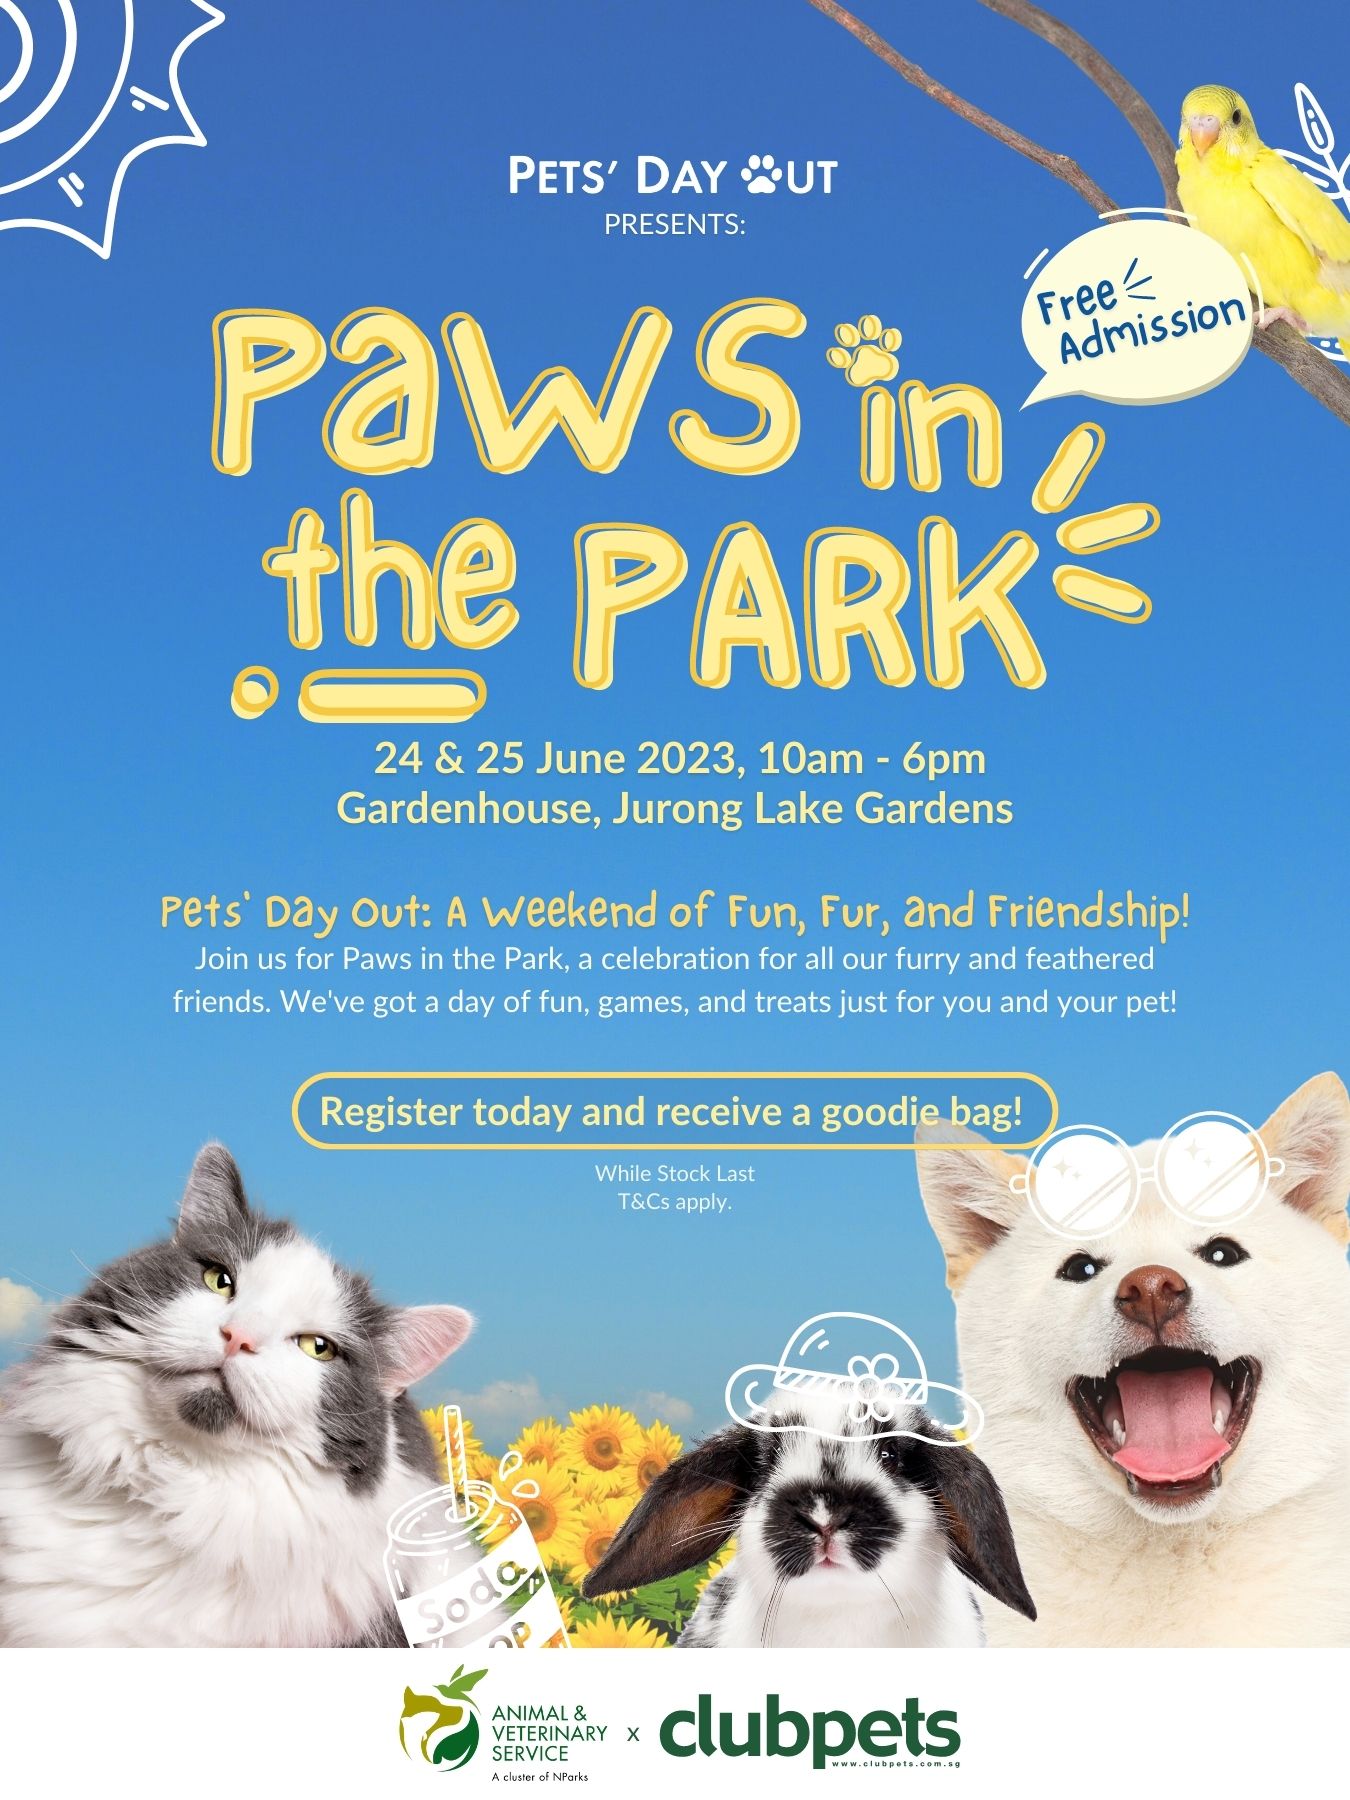 Paws in the Park - Pets' Day Out 2023 | Clubpets Singapore